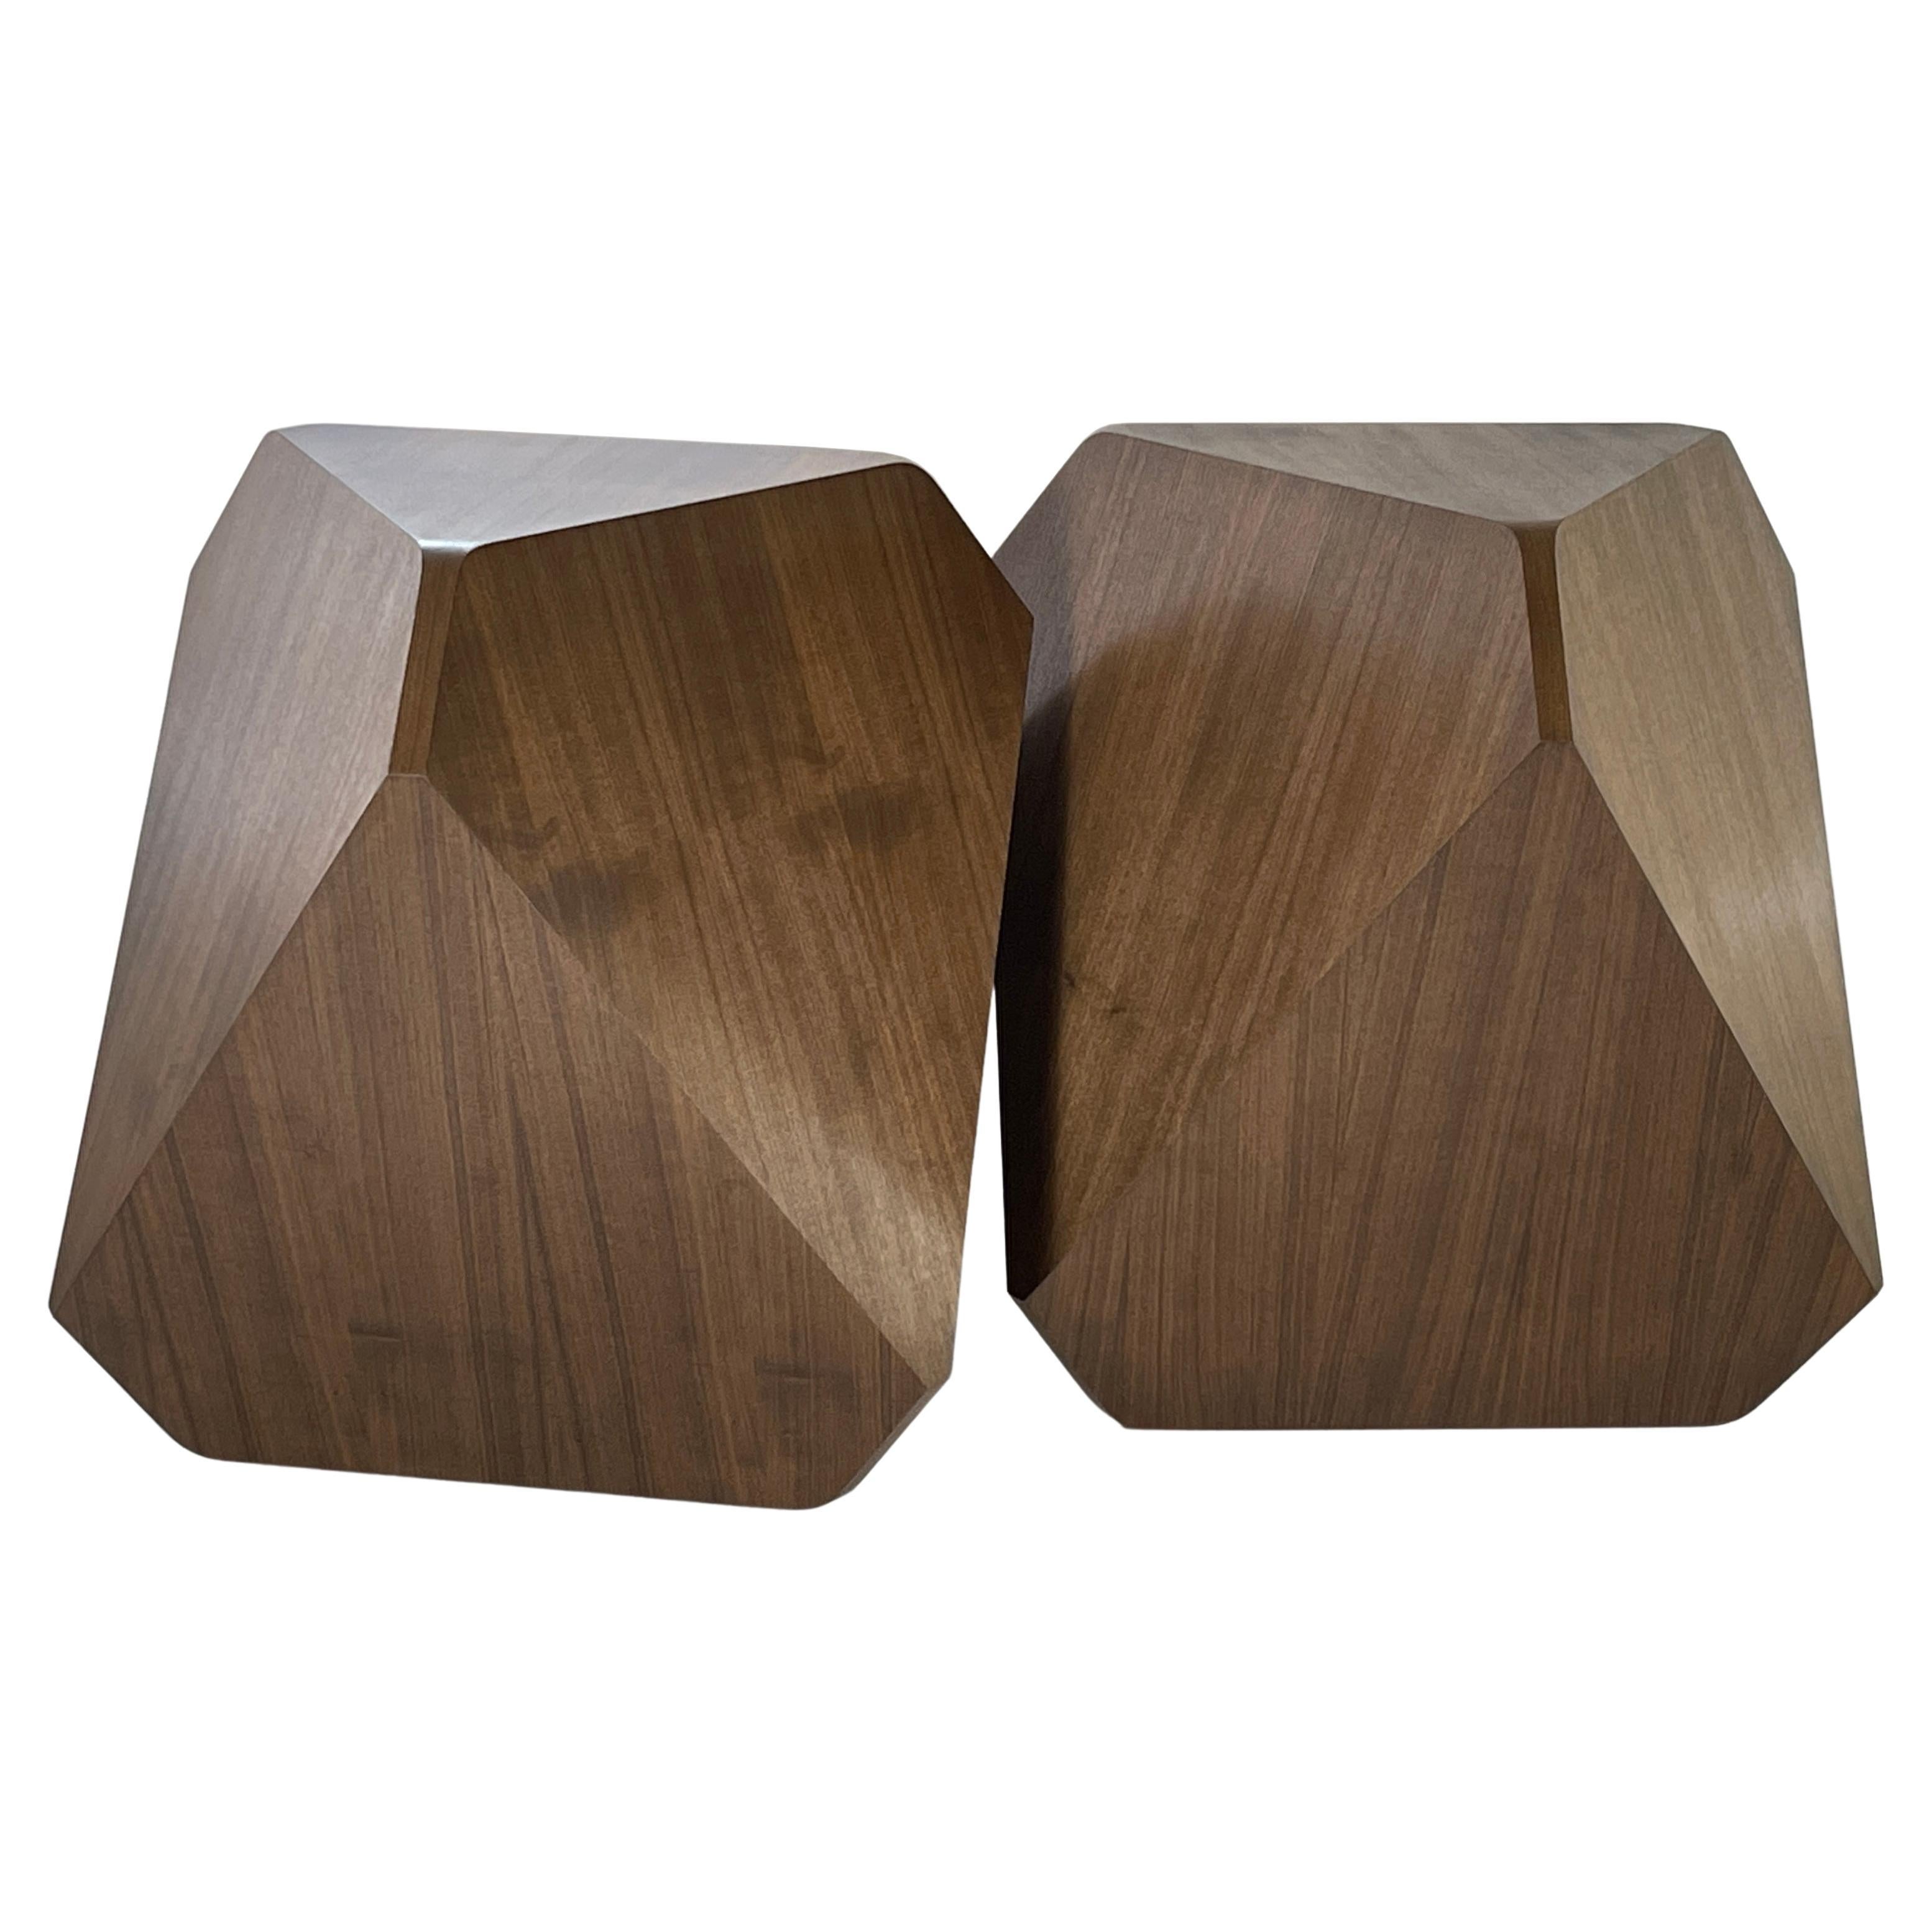 William earle's iconic pedestals now 25% off for the Spring Cherry Blossom Sale